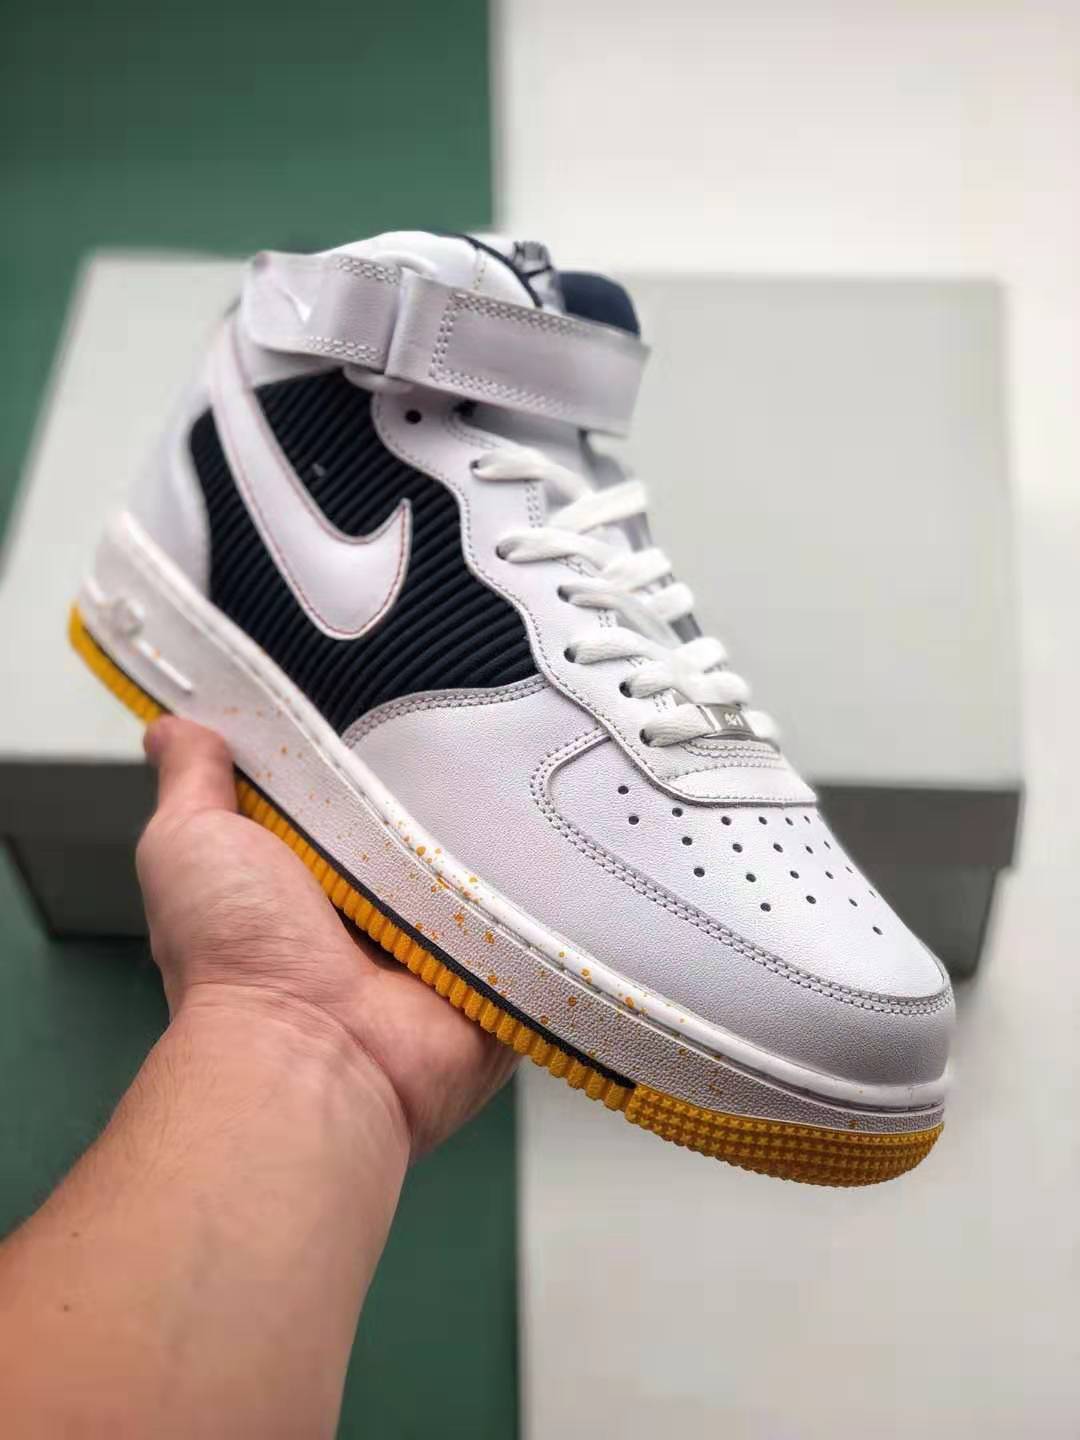 Nike Air Force 1 Mid White Black Yellow 596728-306 - Premium Sneakers for Style & Comfort